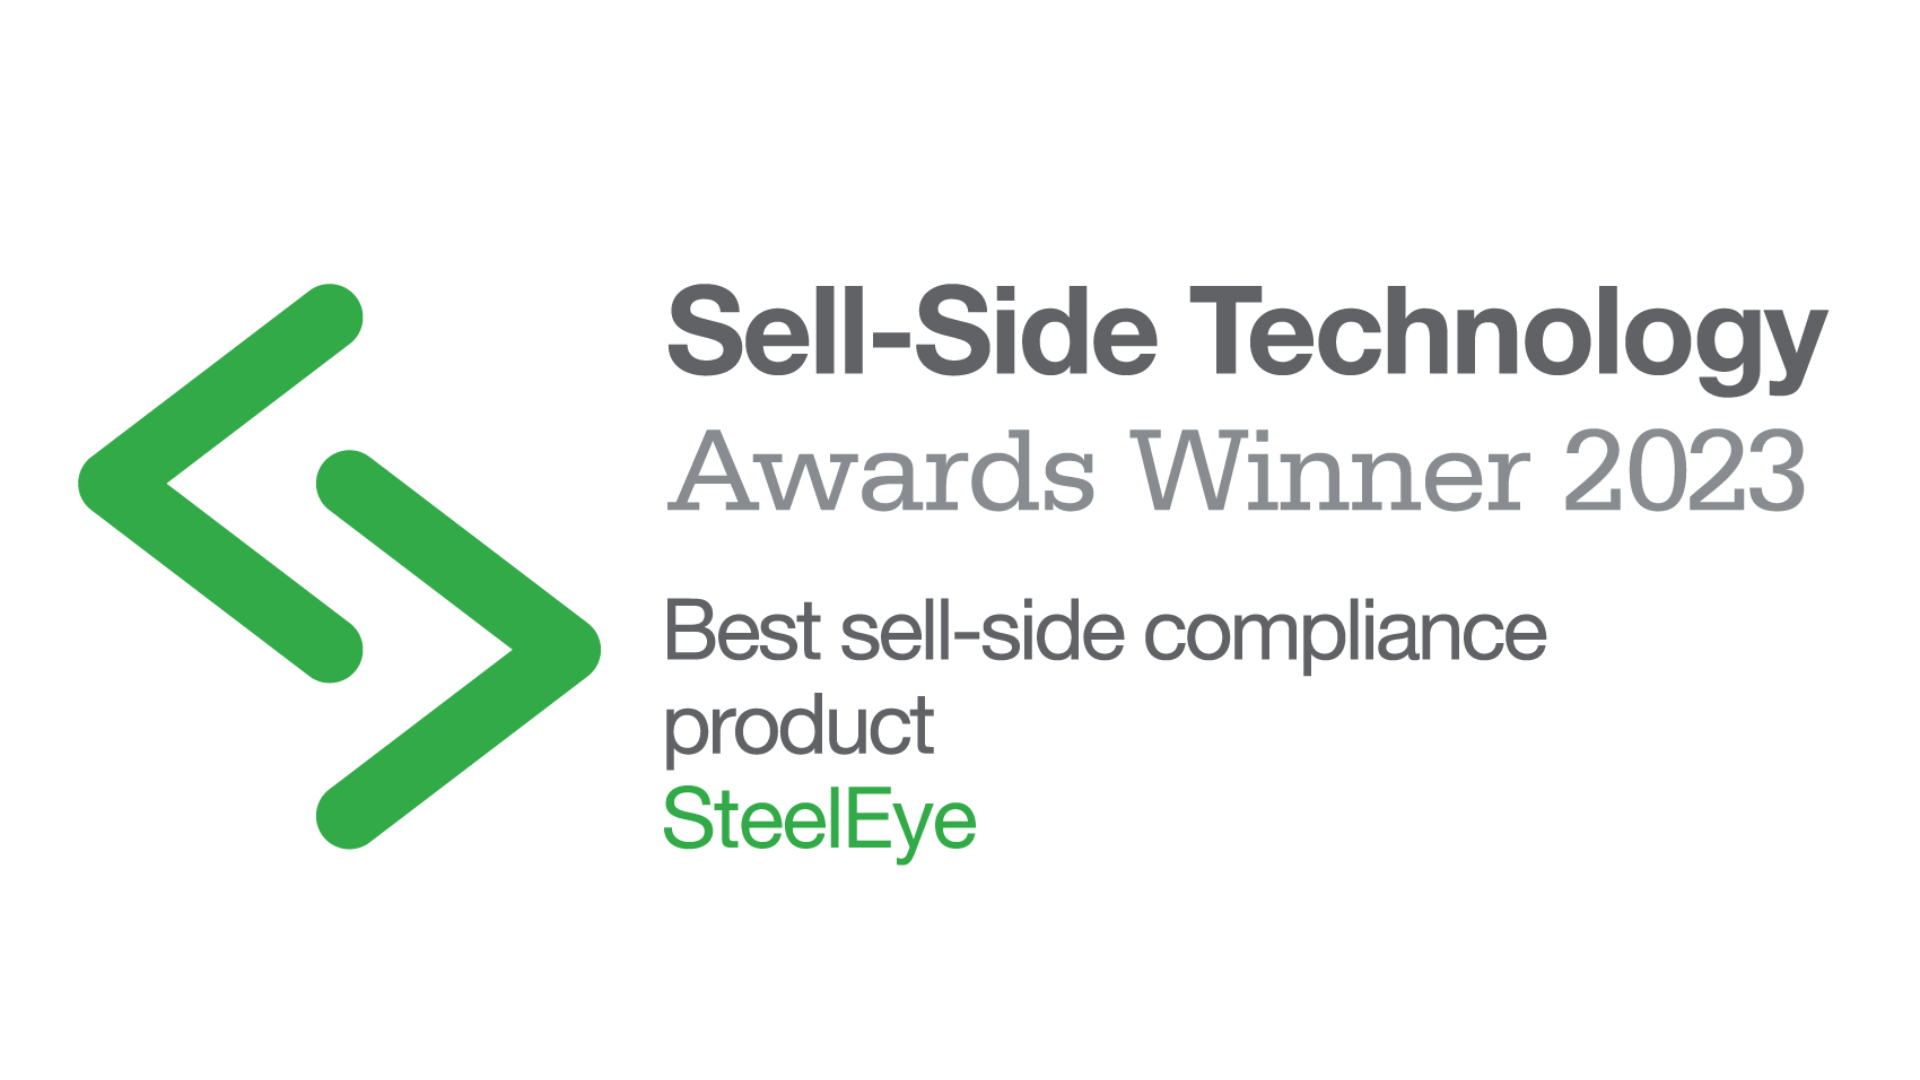 SteelEye has been recognized as the Best Compliance Product in the Waters Sell-Side Technology Awards 2023